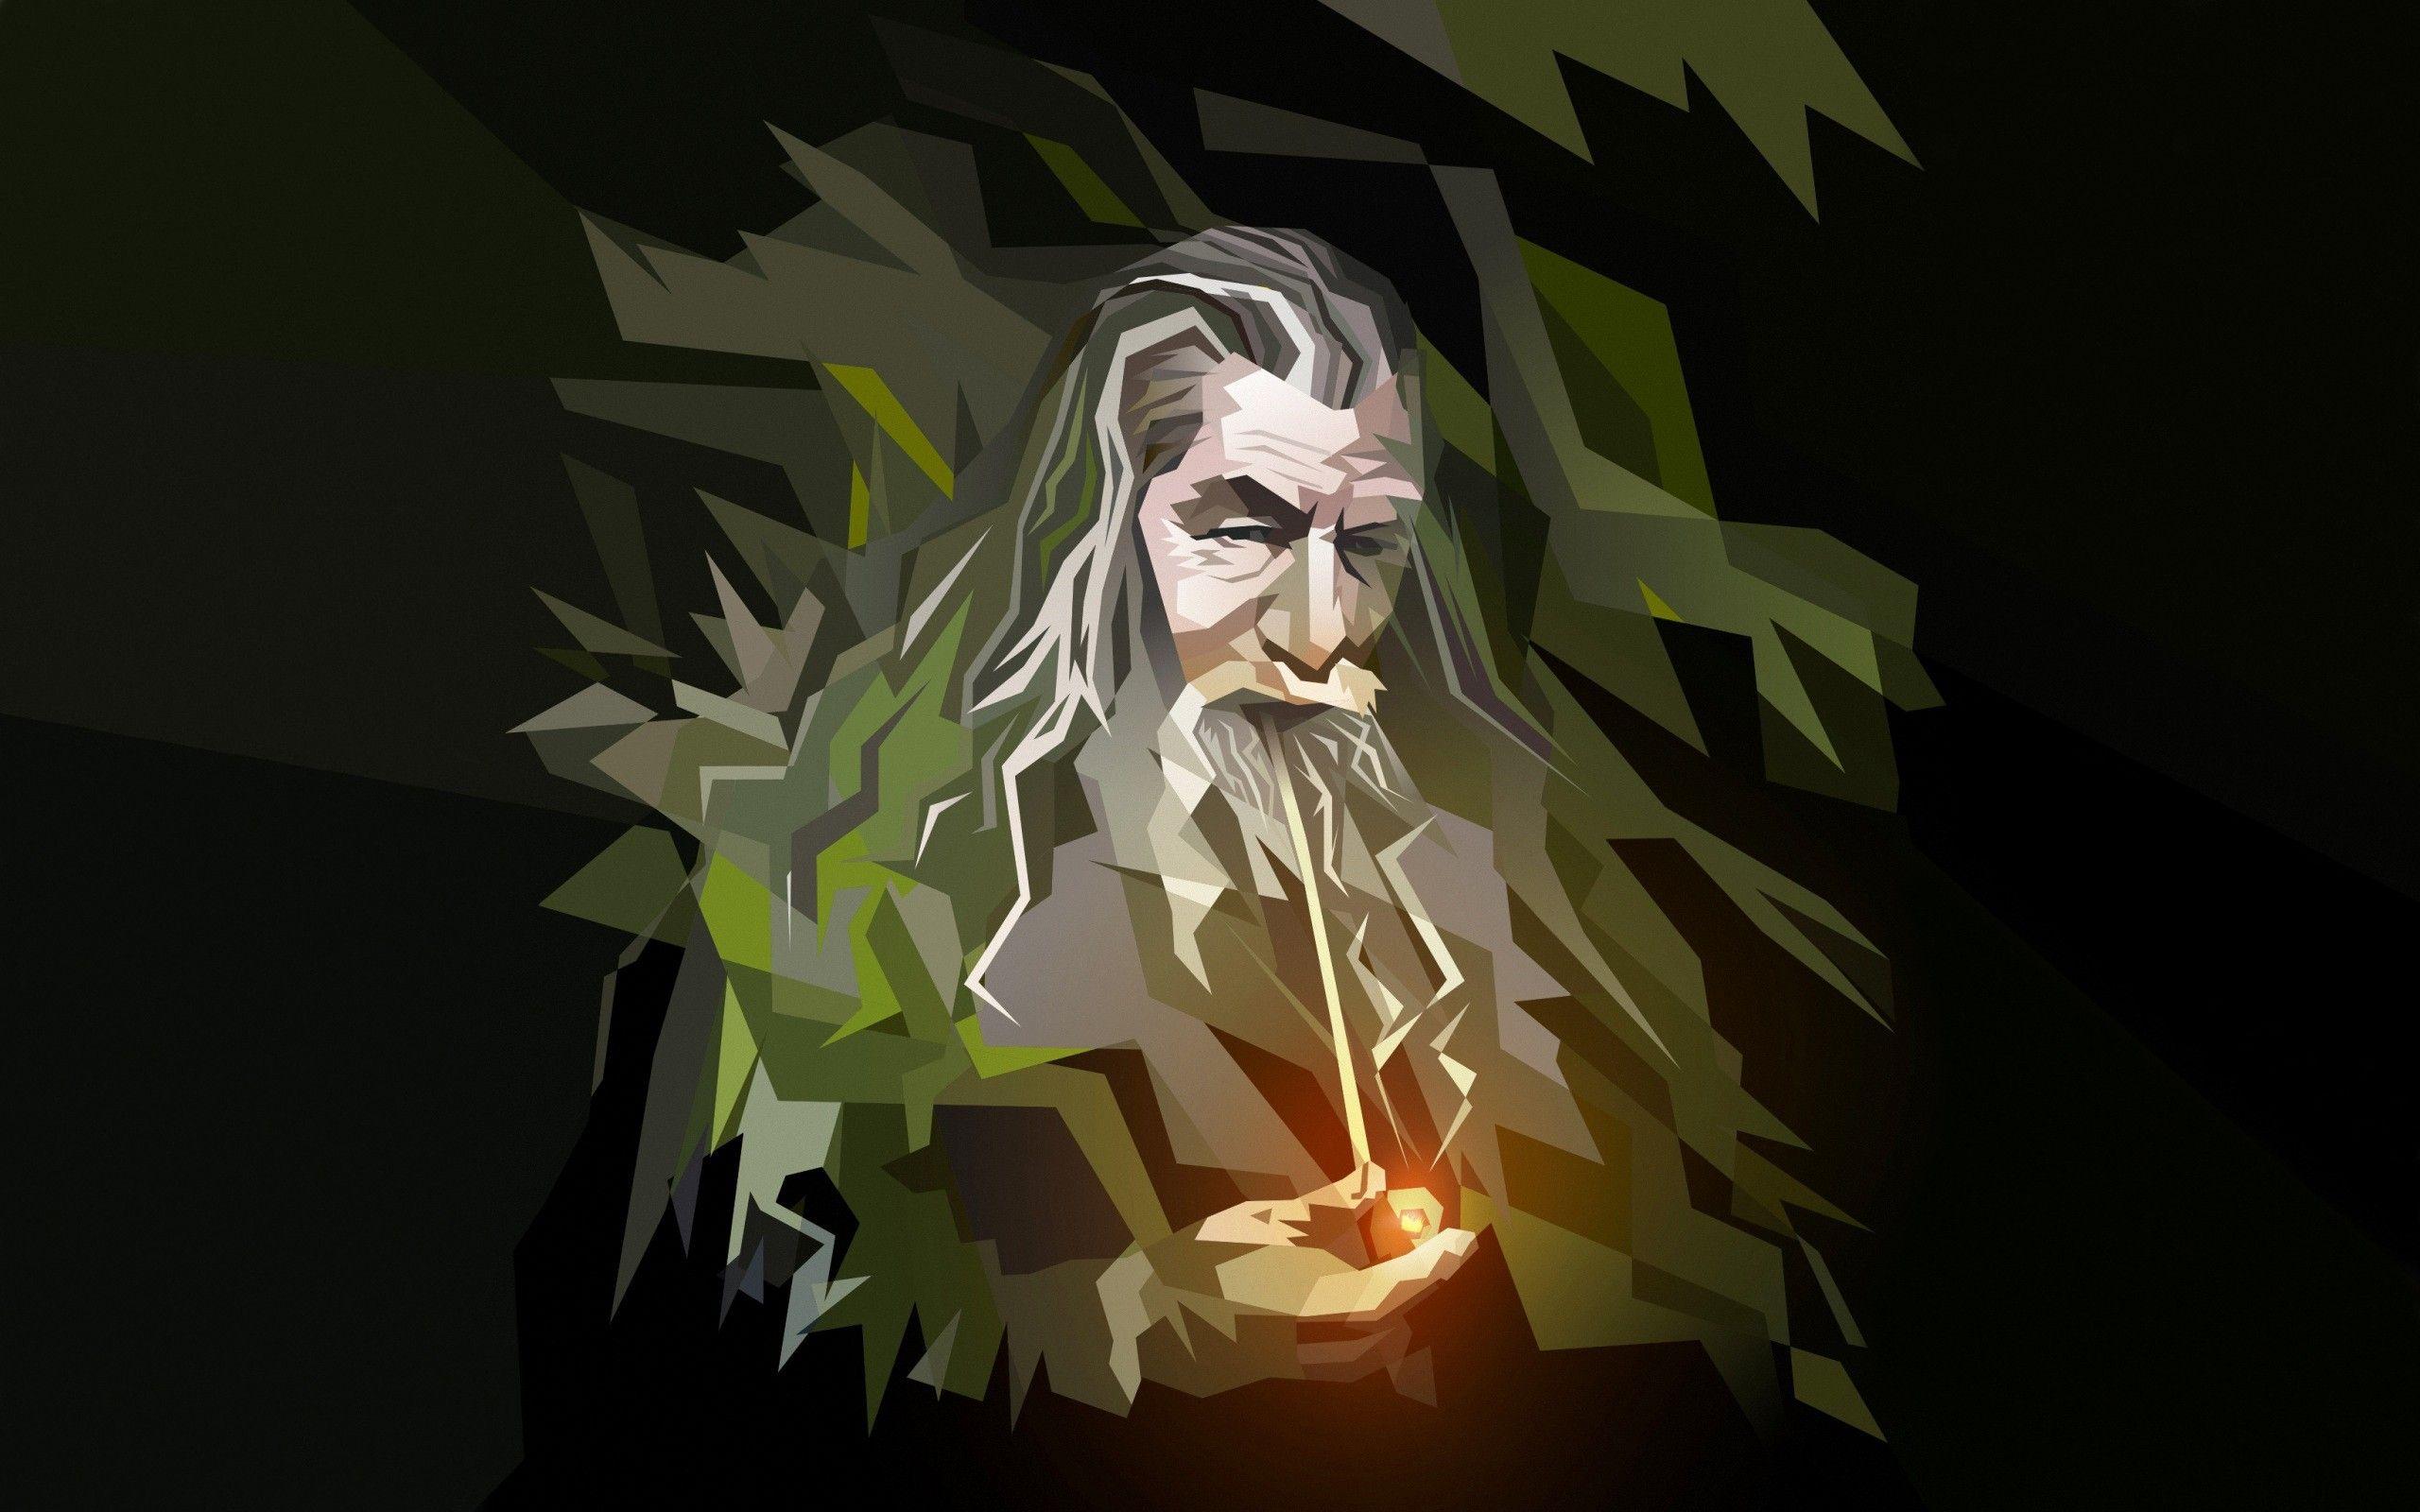 Lord of the Rings Minimalist Wallpapers - Top Free Lord of the Rings